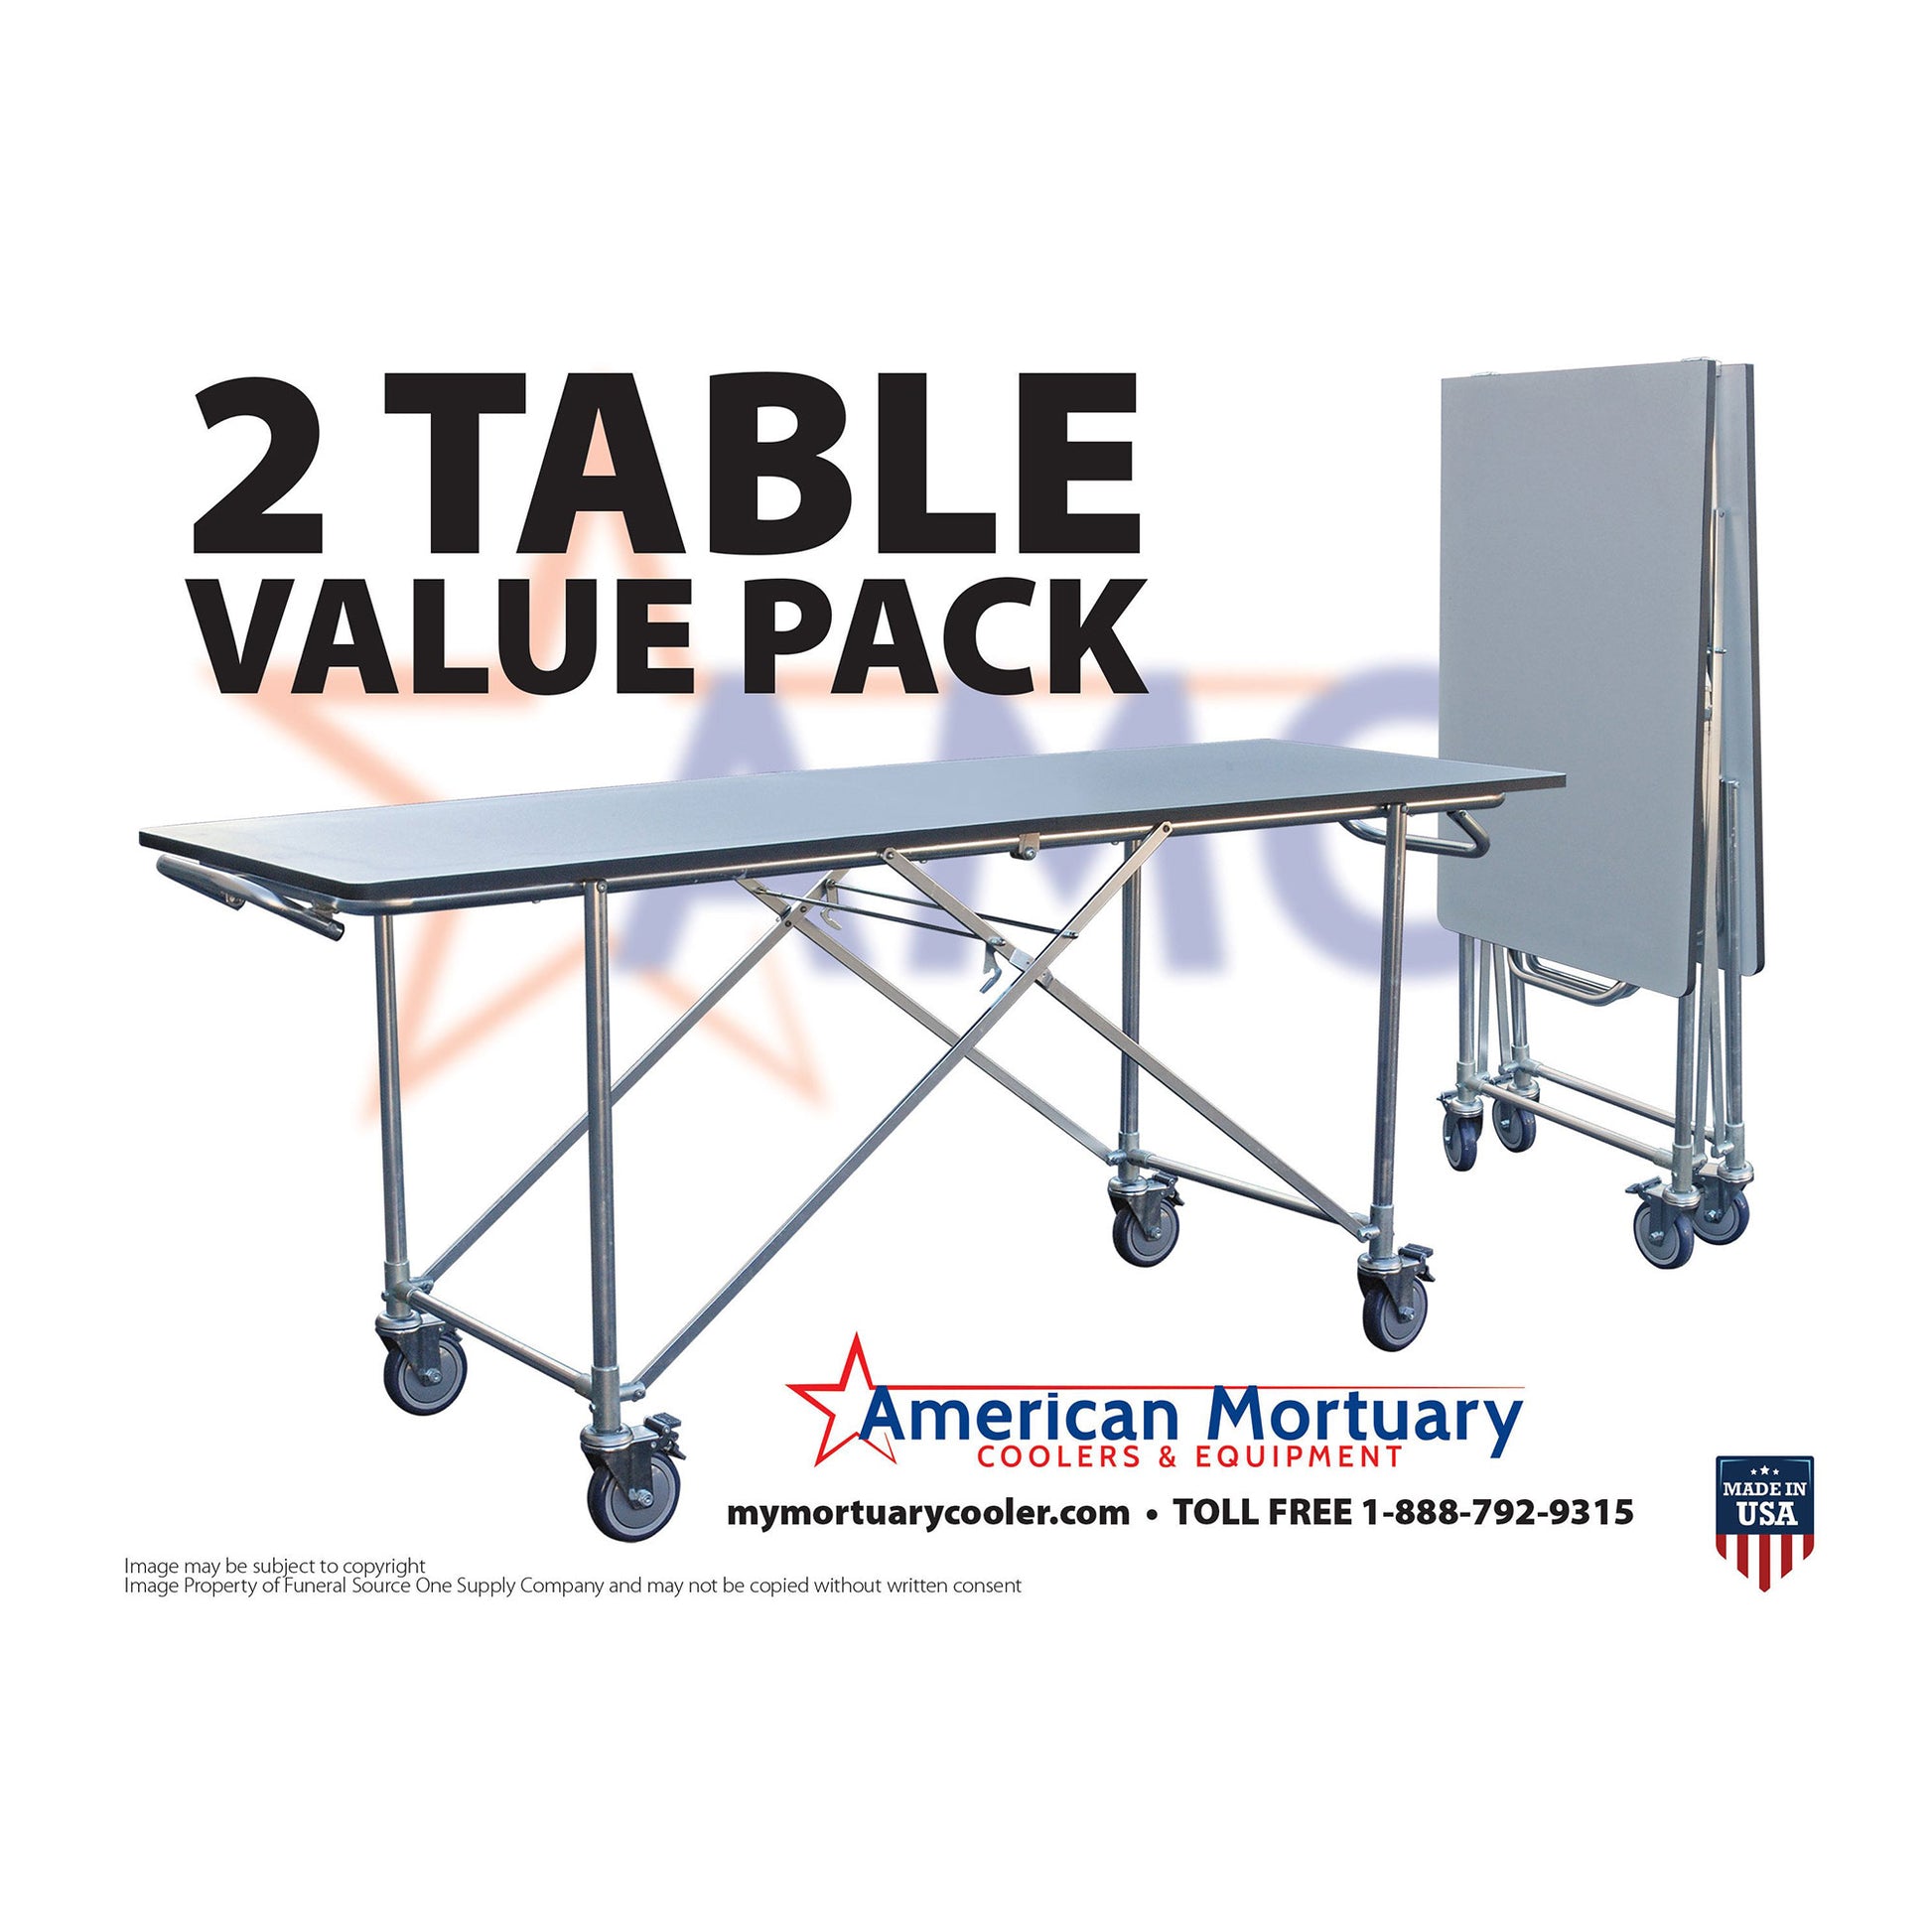 Wad-Free® does double duty on the tablecloth for the holiday meal